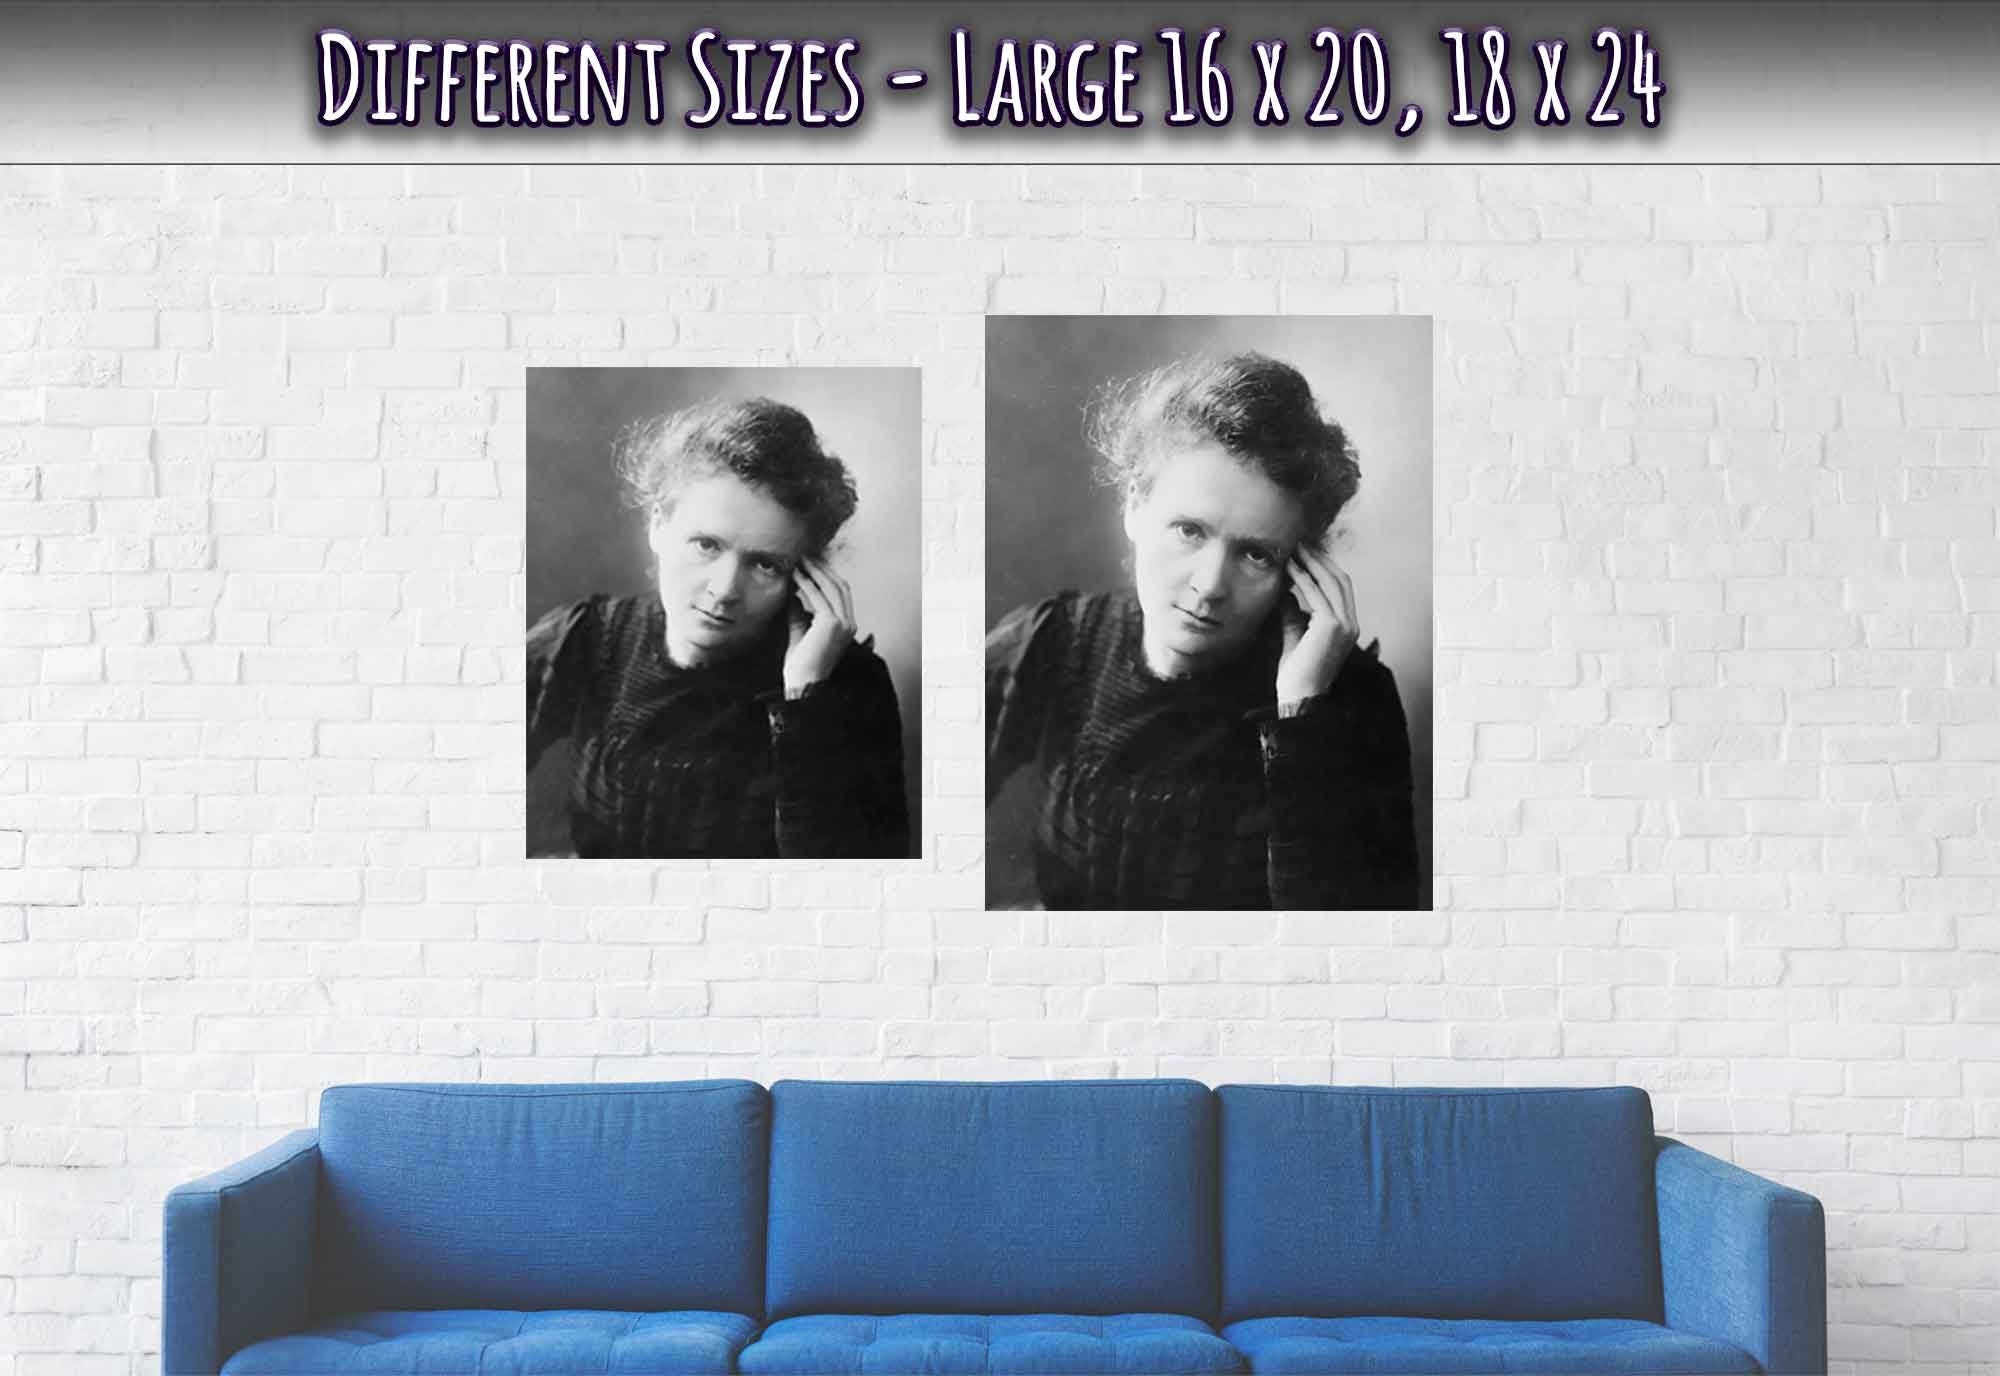 Marie Curie Poster, Female Nobel Prize Winner Twice Over, Vintage Photo - Iconic Marie Curie Print - WallArtPrints4U